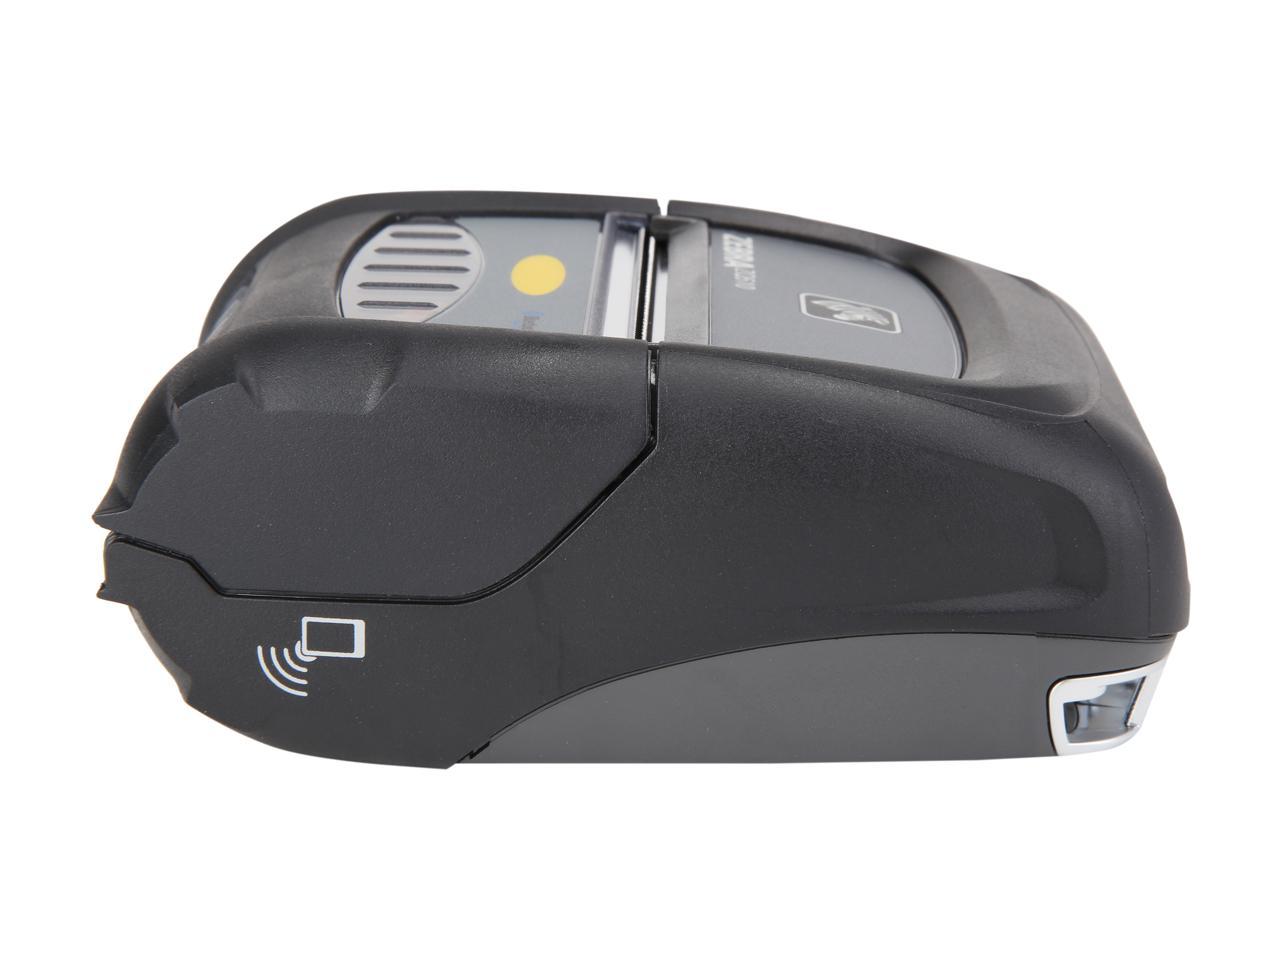 Zebra Zq510 3 Mobile Direct Thermal Receipt And Label Printer 203 Dpi Bluetooth 40 Linered 2493